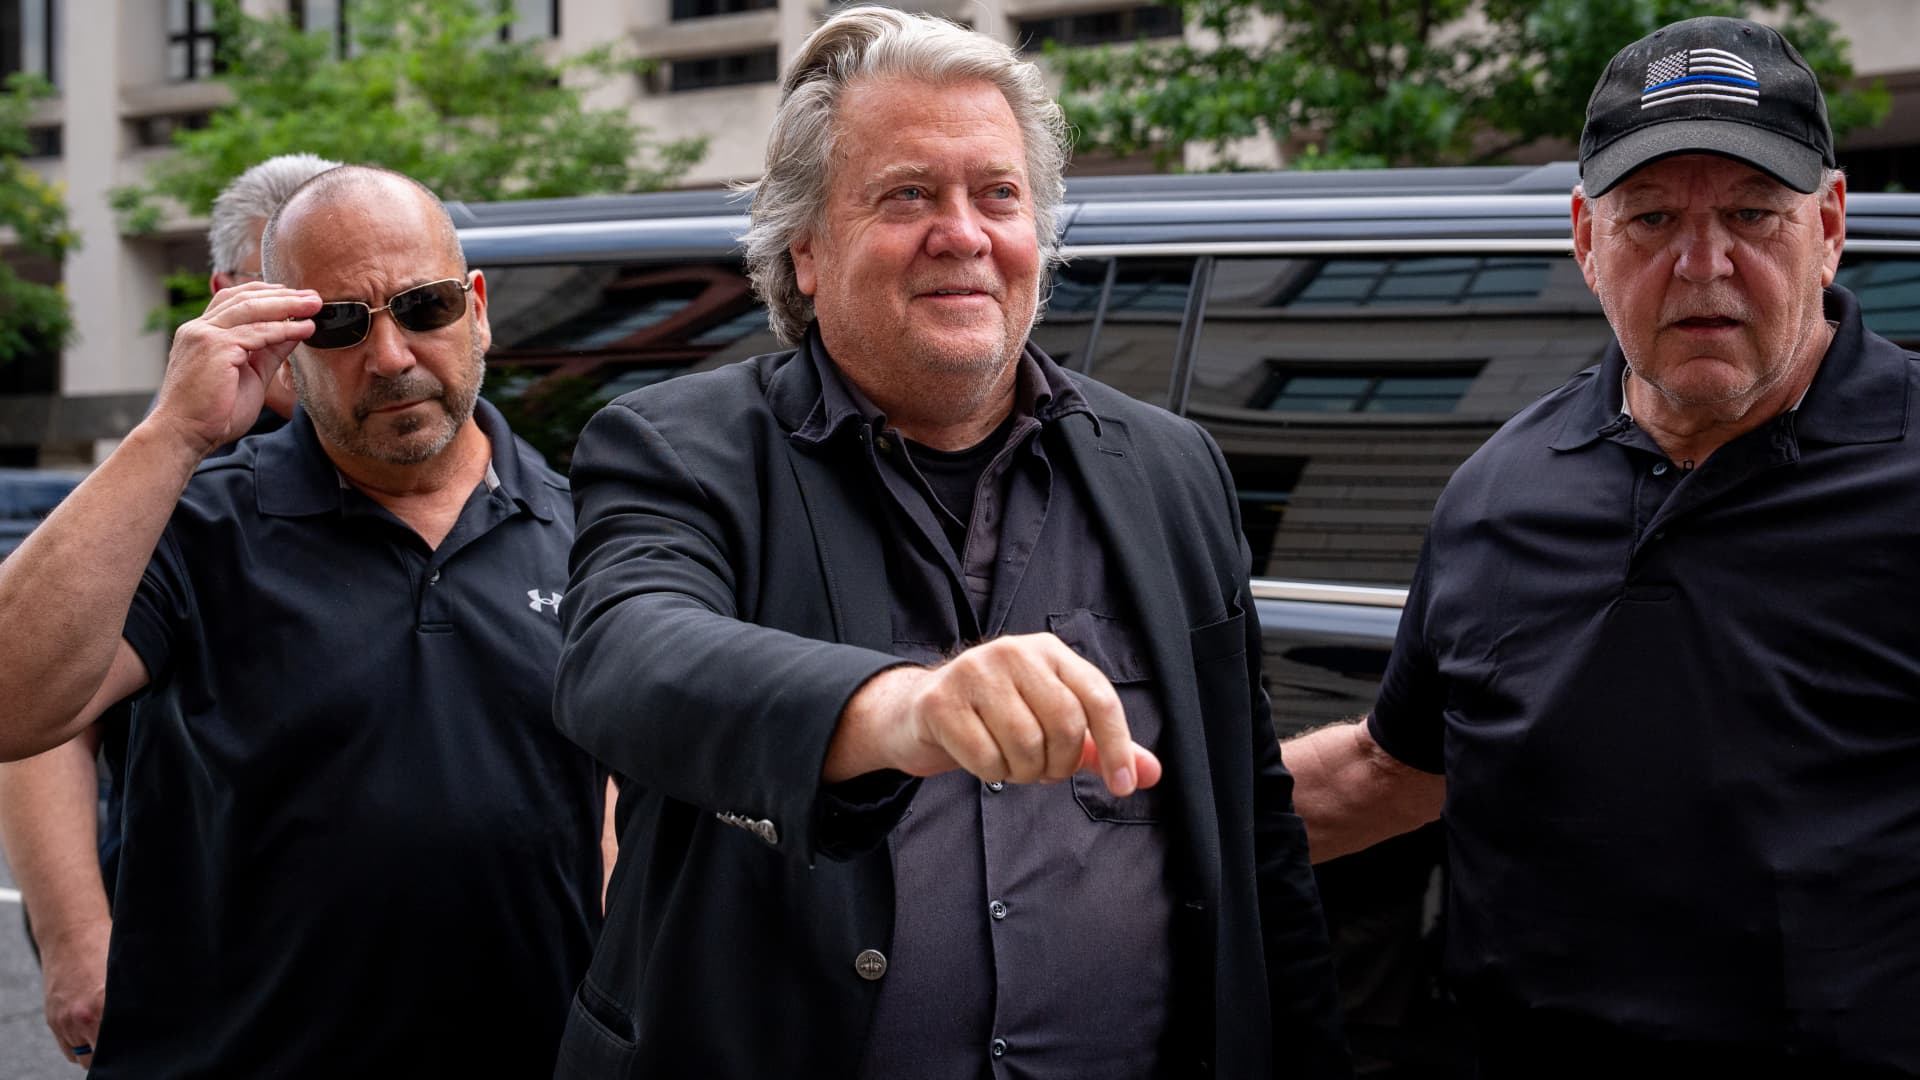 Former Trump aide Steve Bannon ordered to jail by July 1 to serve contempt of Congress sentence